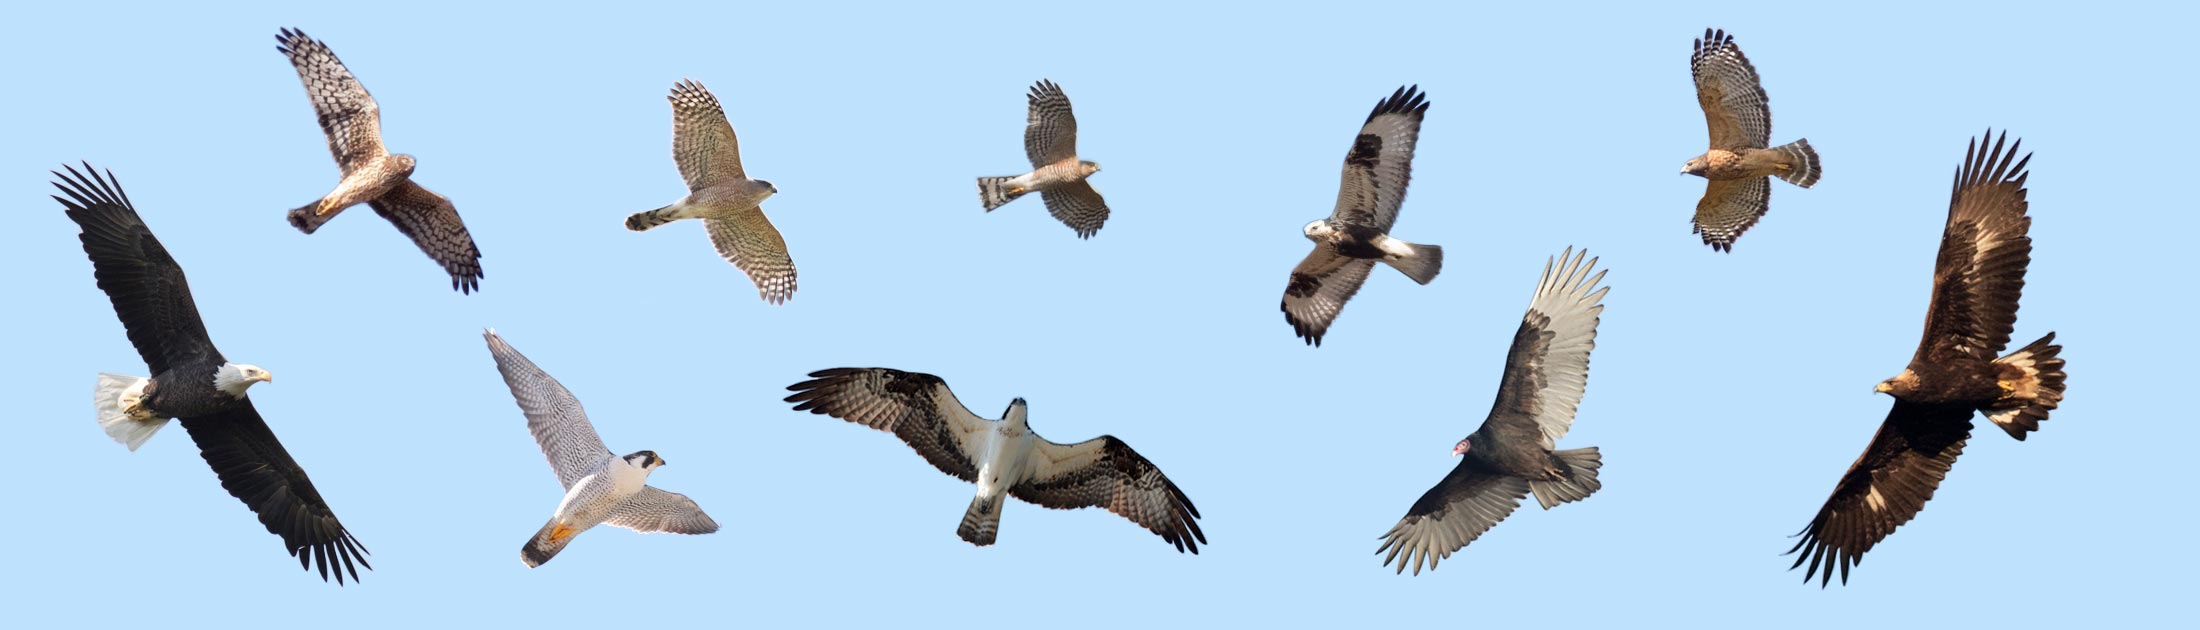 How to Identify the 5 Major Groups of Raptors